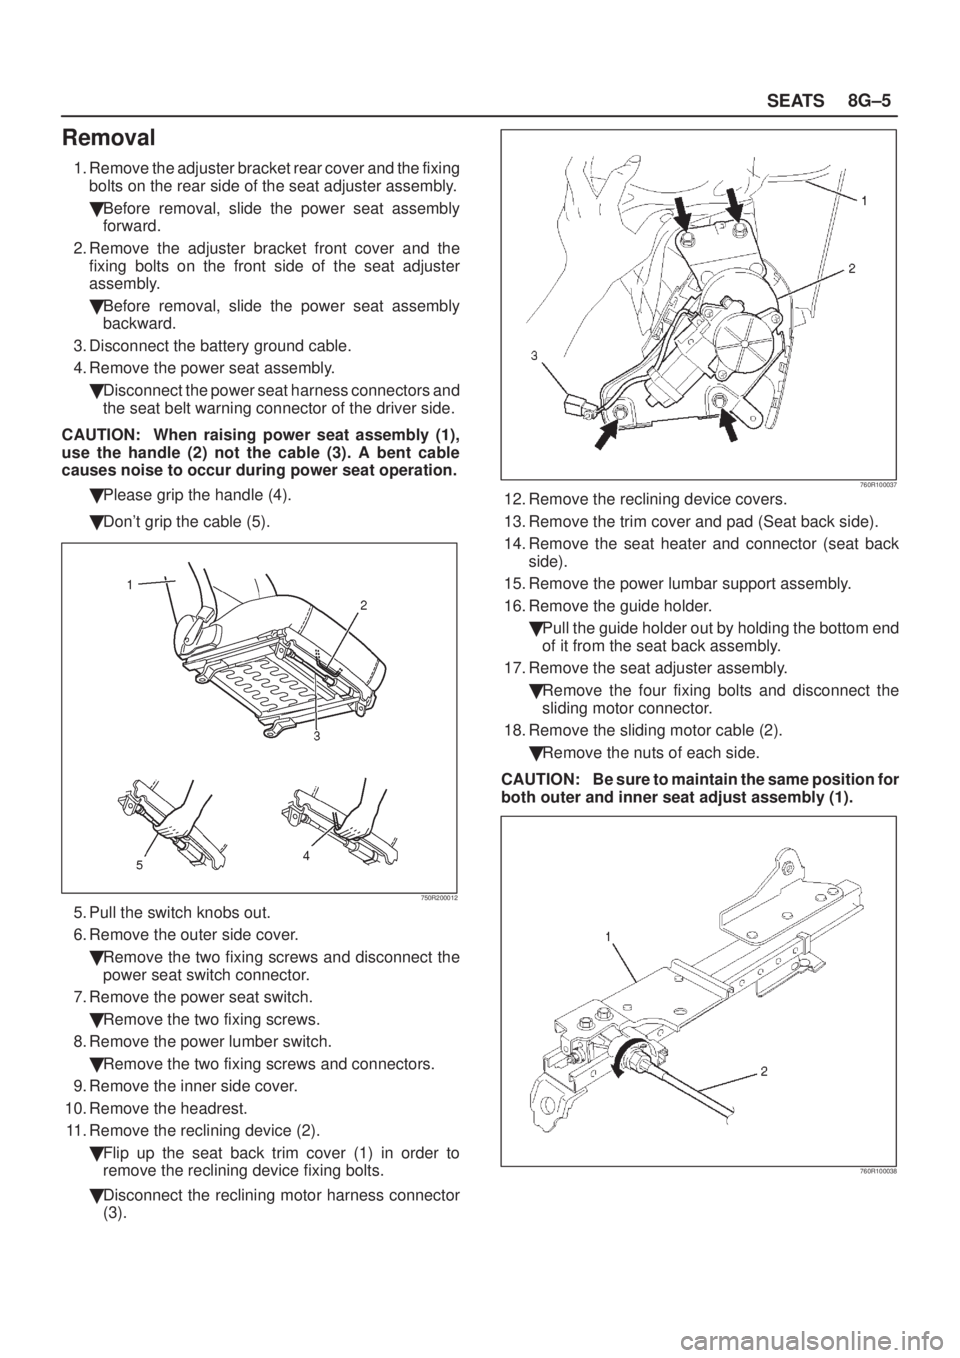 ISUZU AXIOM 2002  Service Repair Manual SEATS8G±5
Removal
1. Remove the adjuster bracket rear cover and the fixing
bolts on the rear side of the seat adjuster assembly.
Before removal, slide the power seat assembly
forward.
2. Remove the 